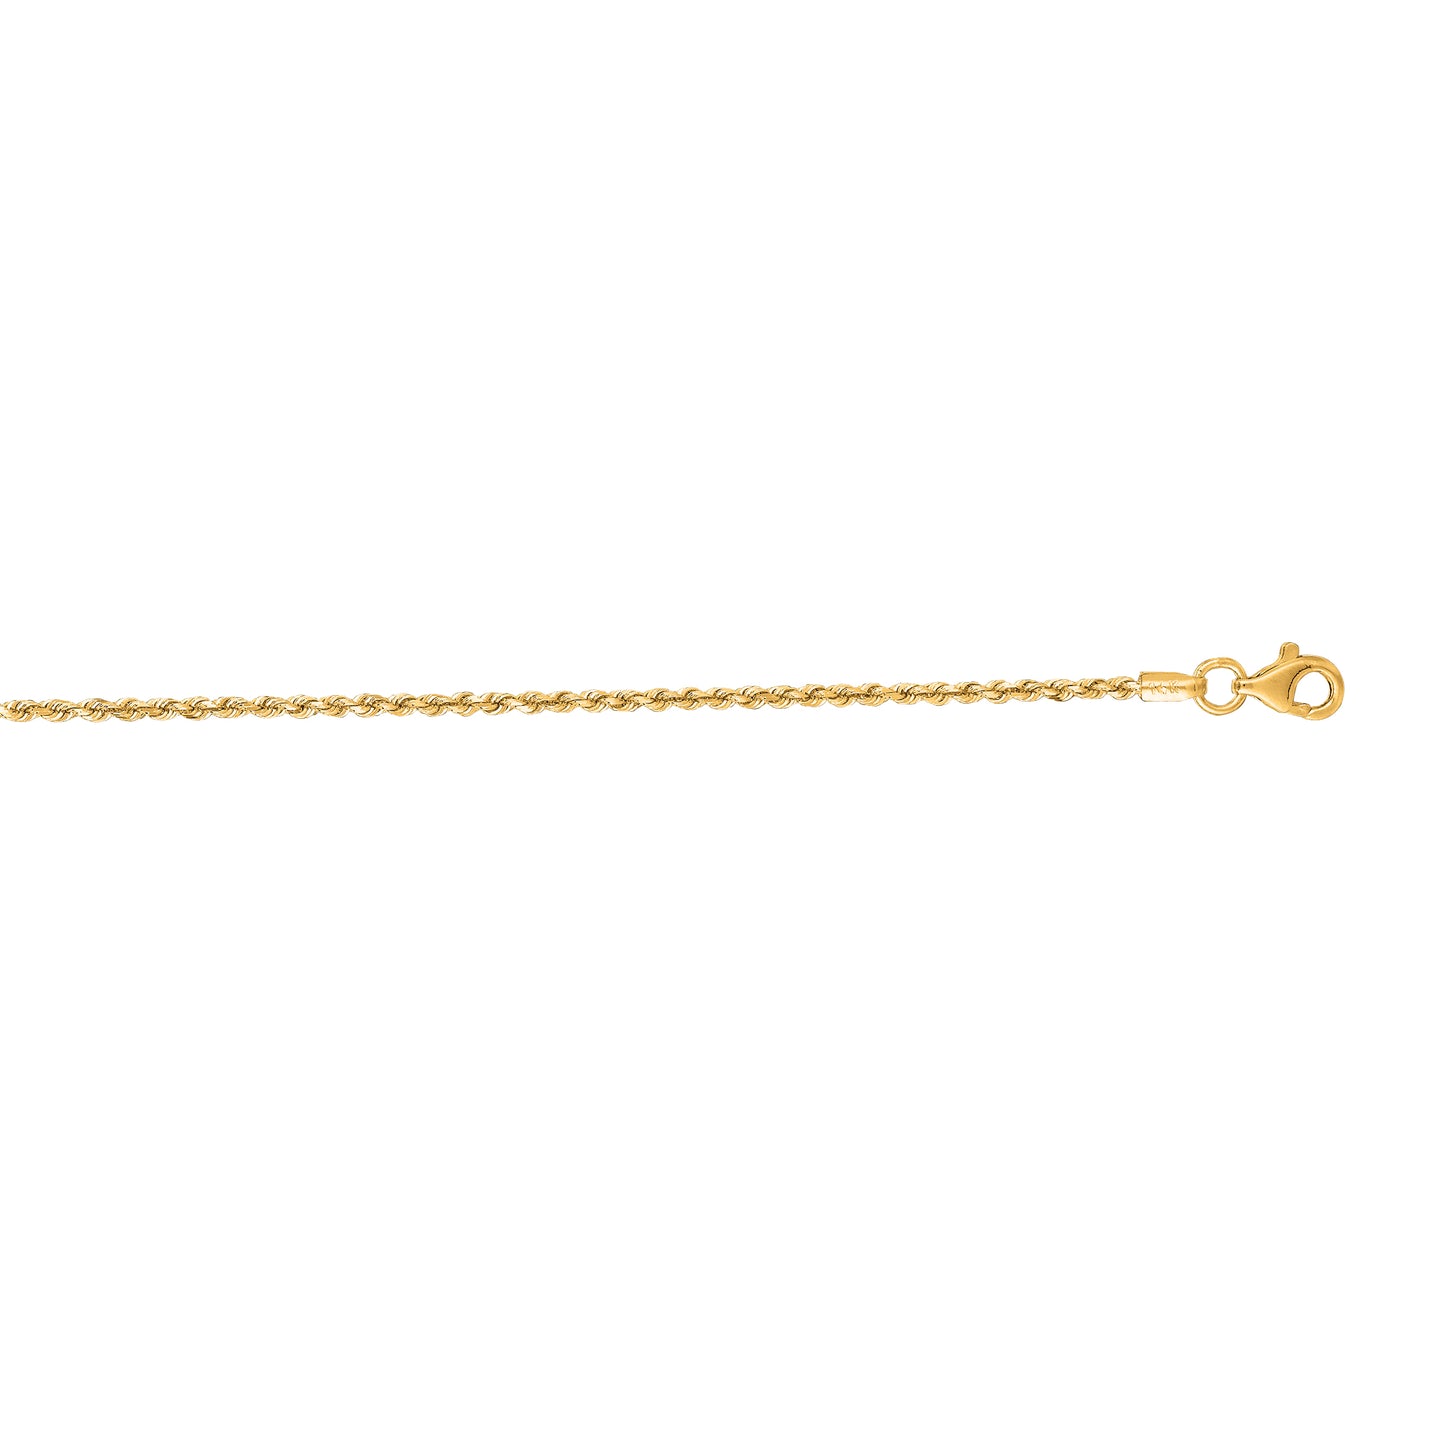 10K Gold 1.6mm Solid Diamond Cut Royal Rope Chain